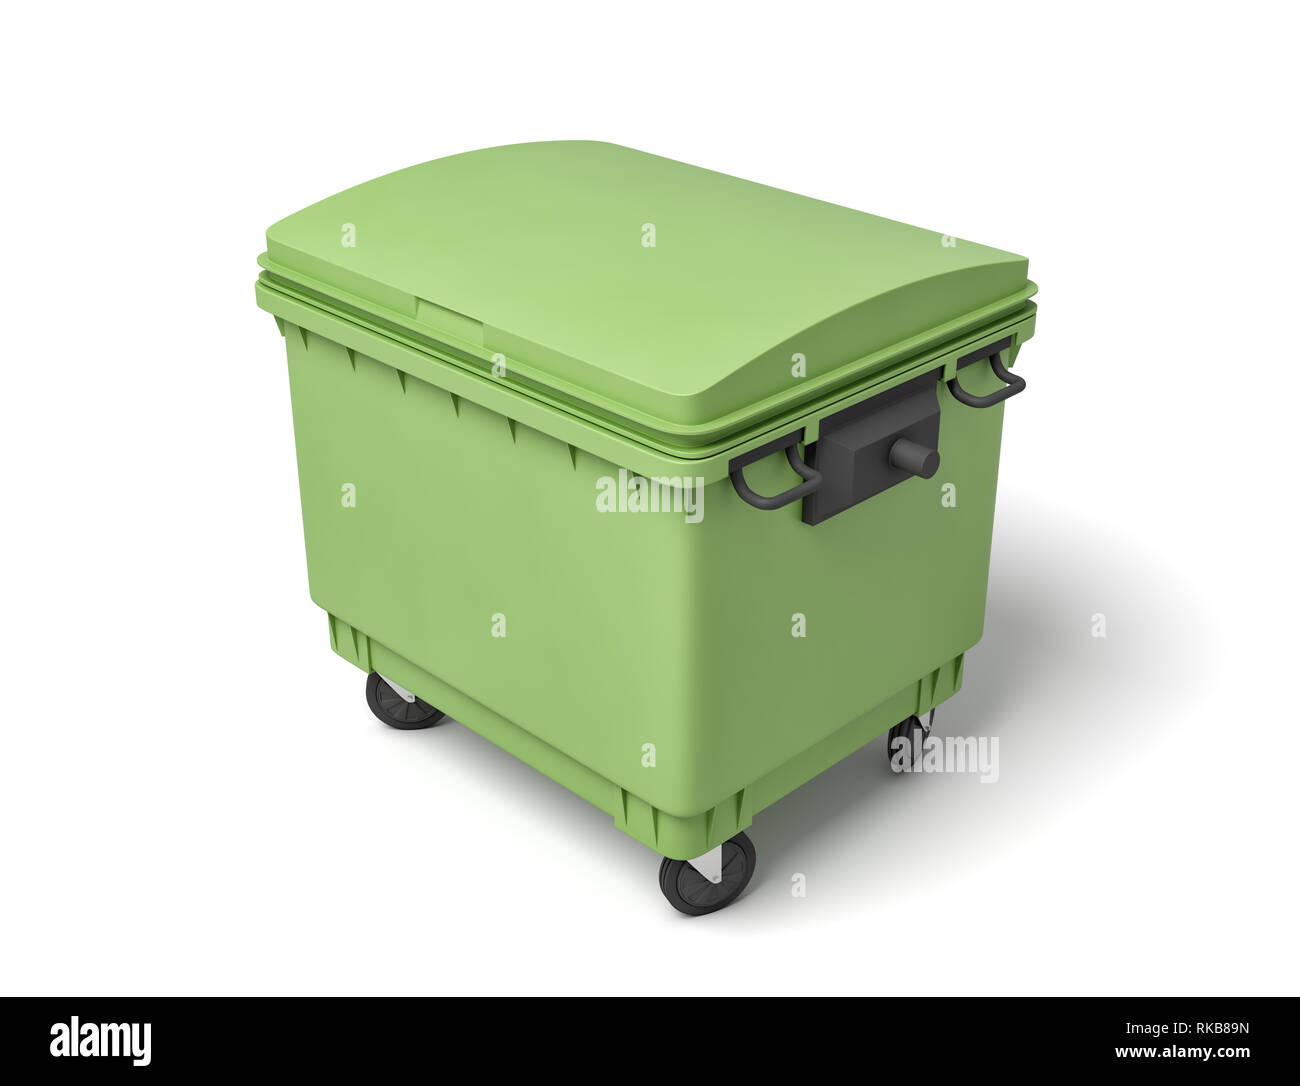 3d rendering of green trash bin isolated on white background Stock Photo